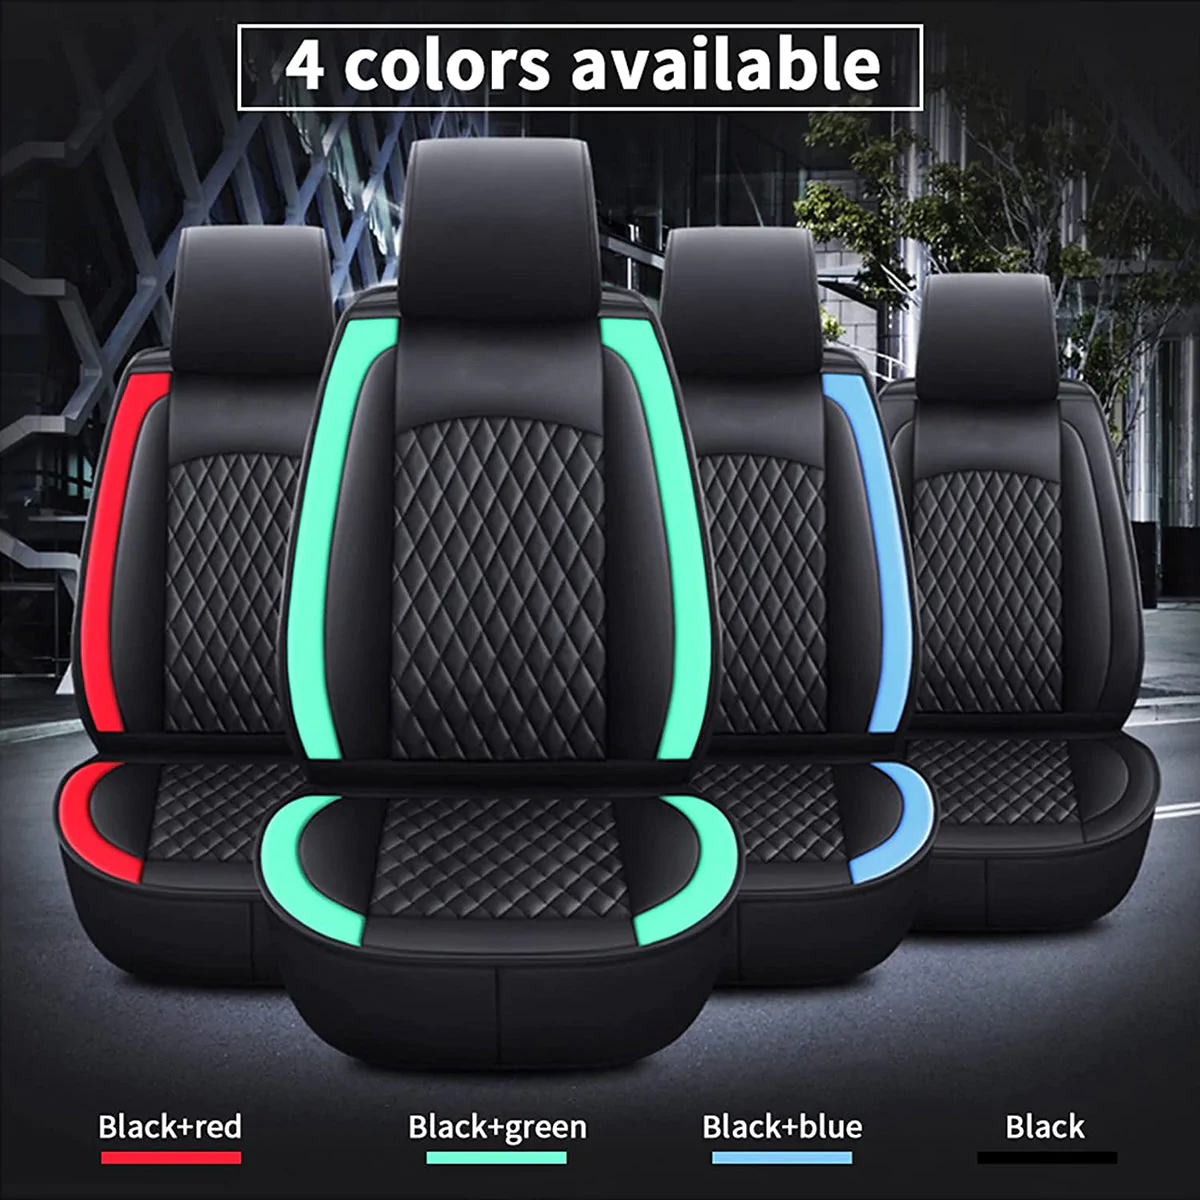 Custom Text For Seat Covers 5 Seats Full Set, Custom Fit For Your Cars, Leatherette Automotive Seat Cushion Protector Universal Fit, Vehicle Auto Interior Decor IN13988